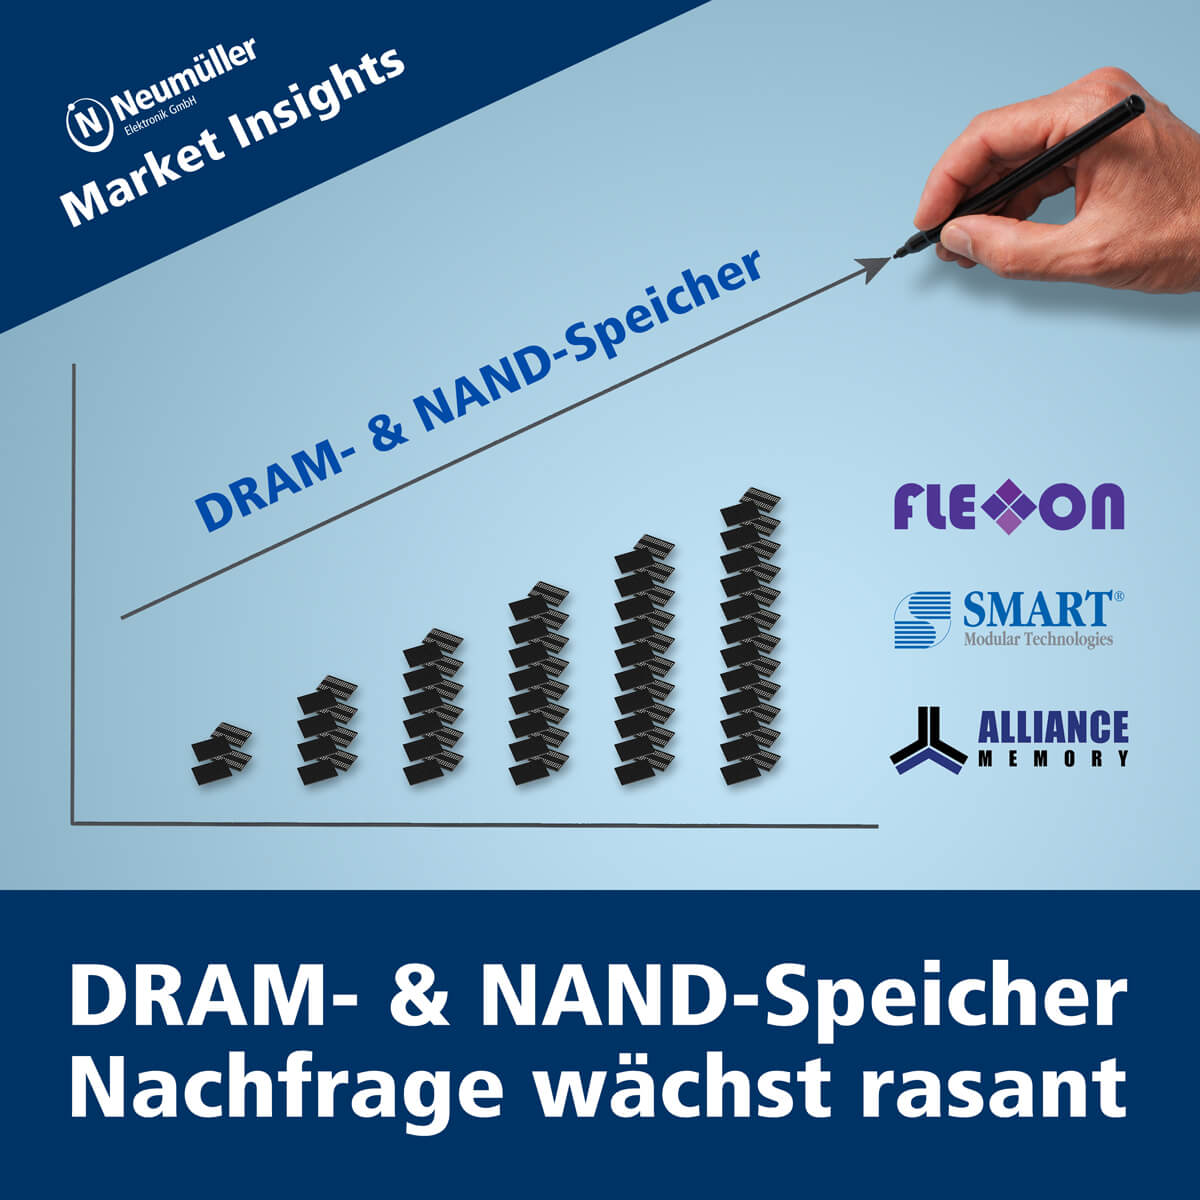 DRAM and NAND memory demand growing rapidly